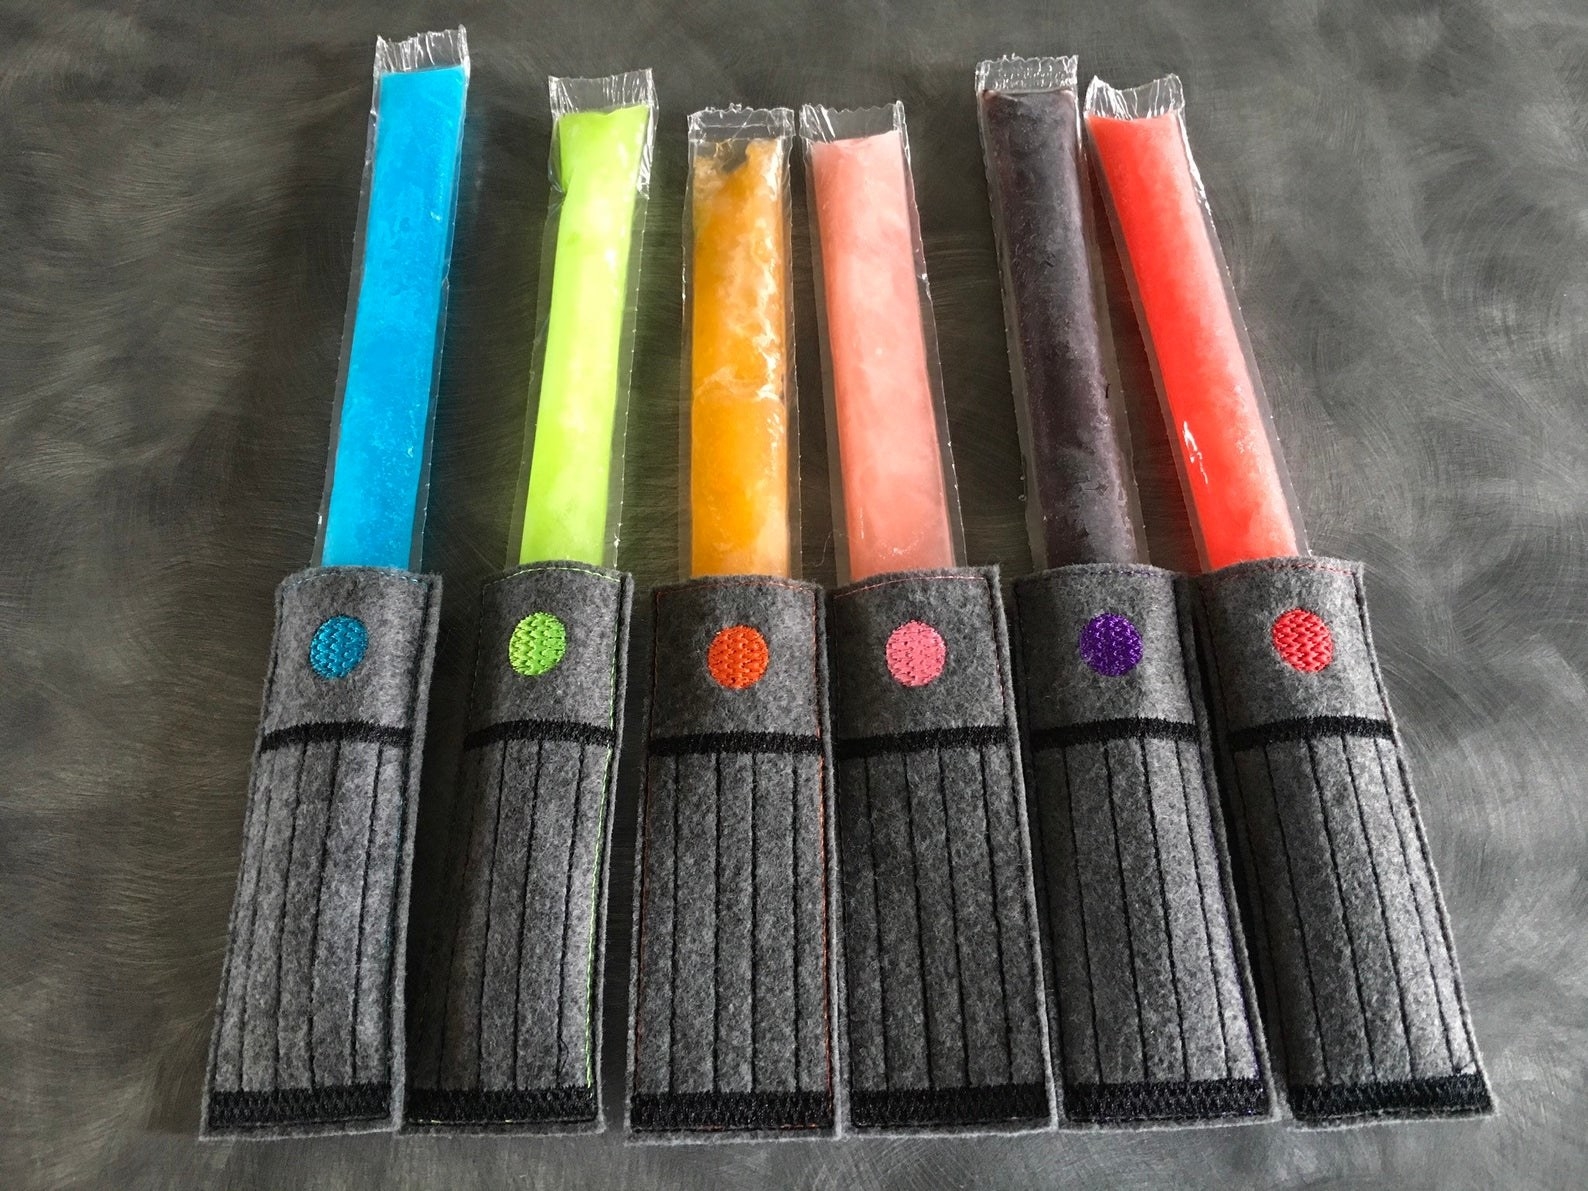 six ice pops with holders on each one that make them look like a lightsaber